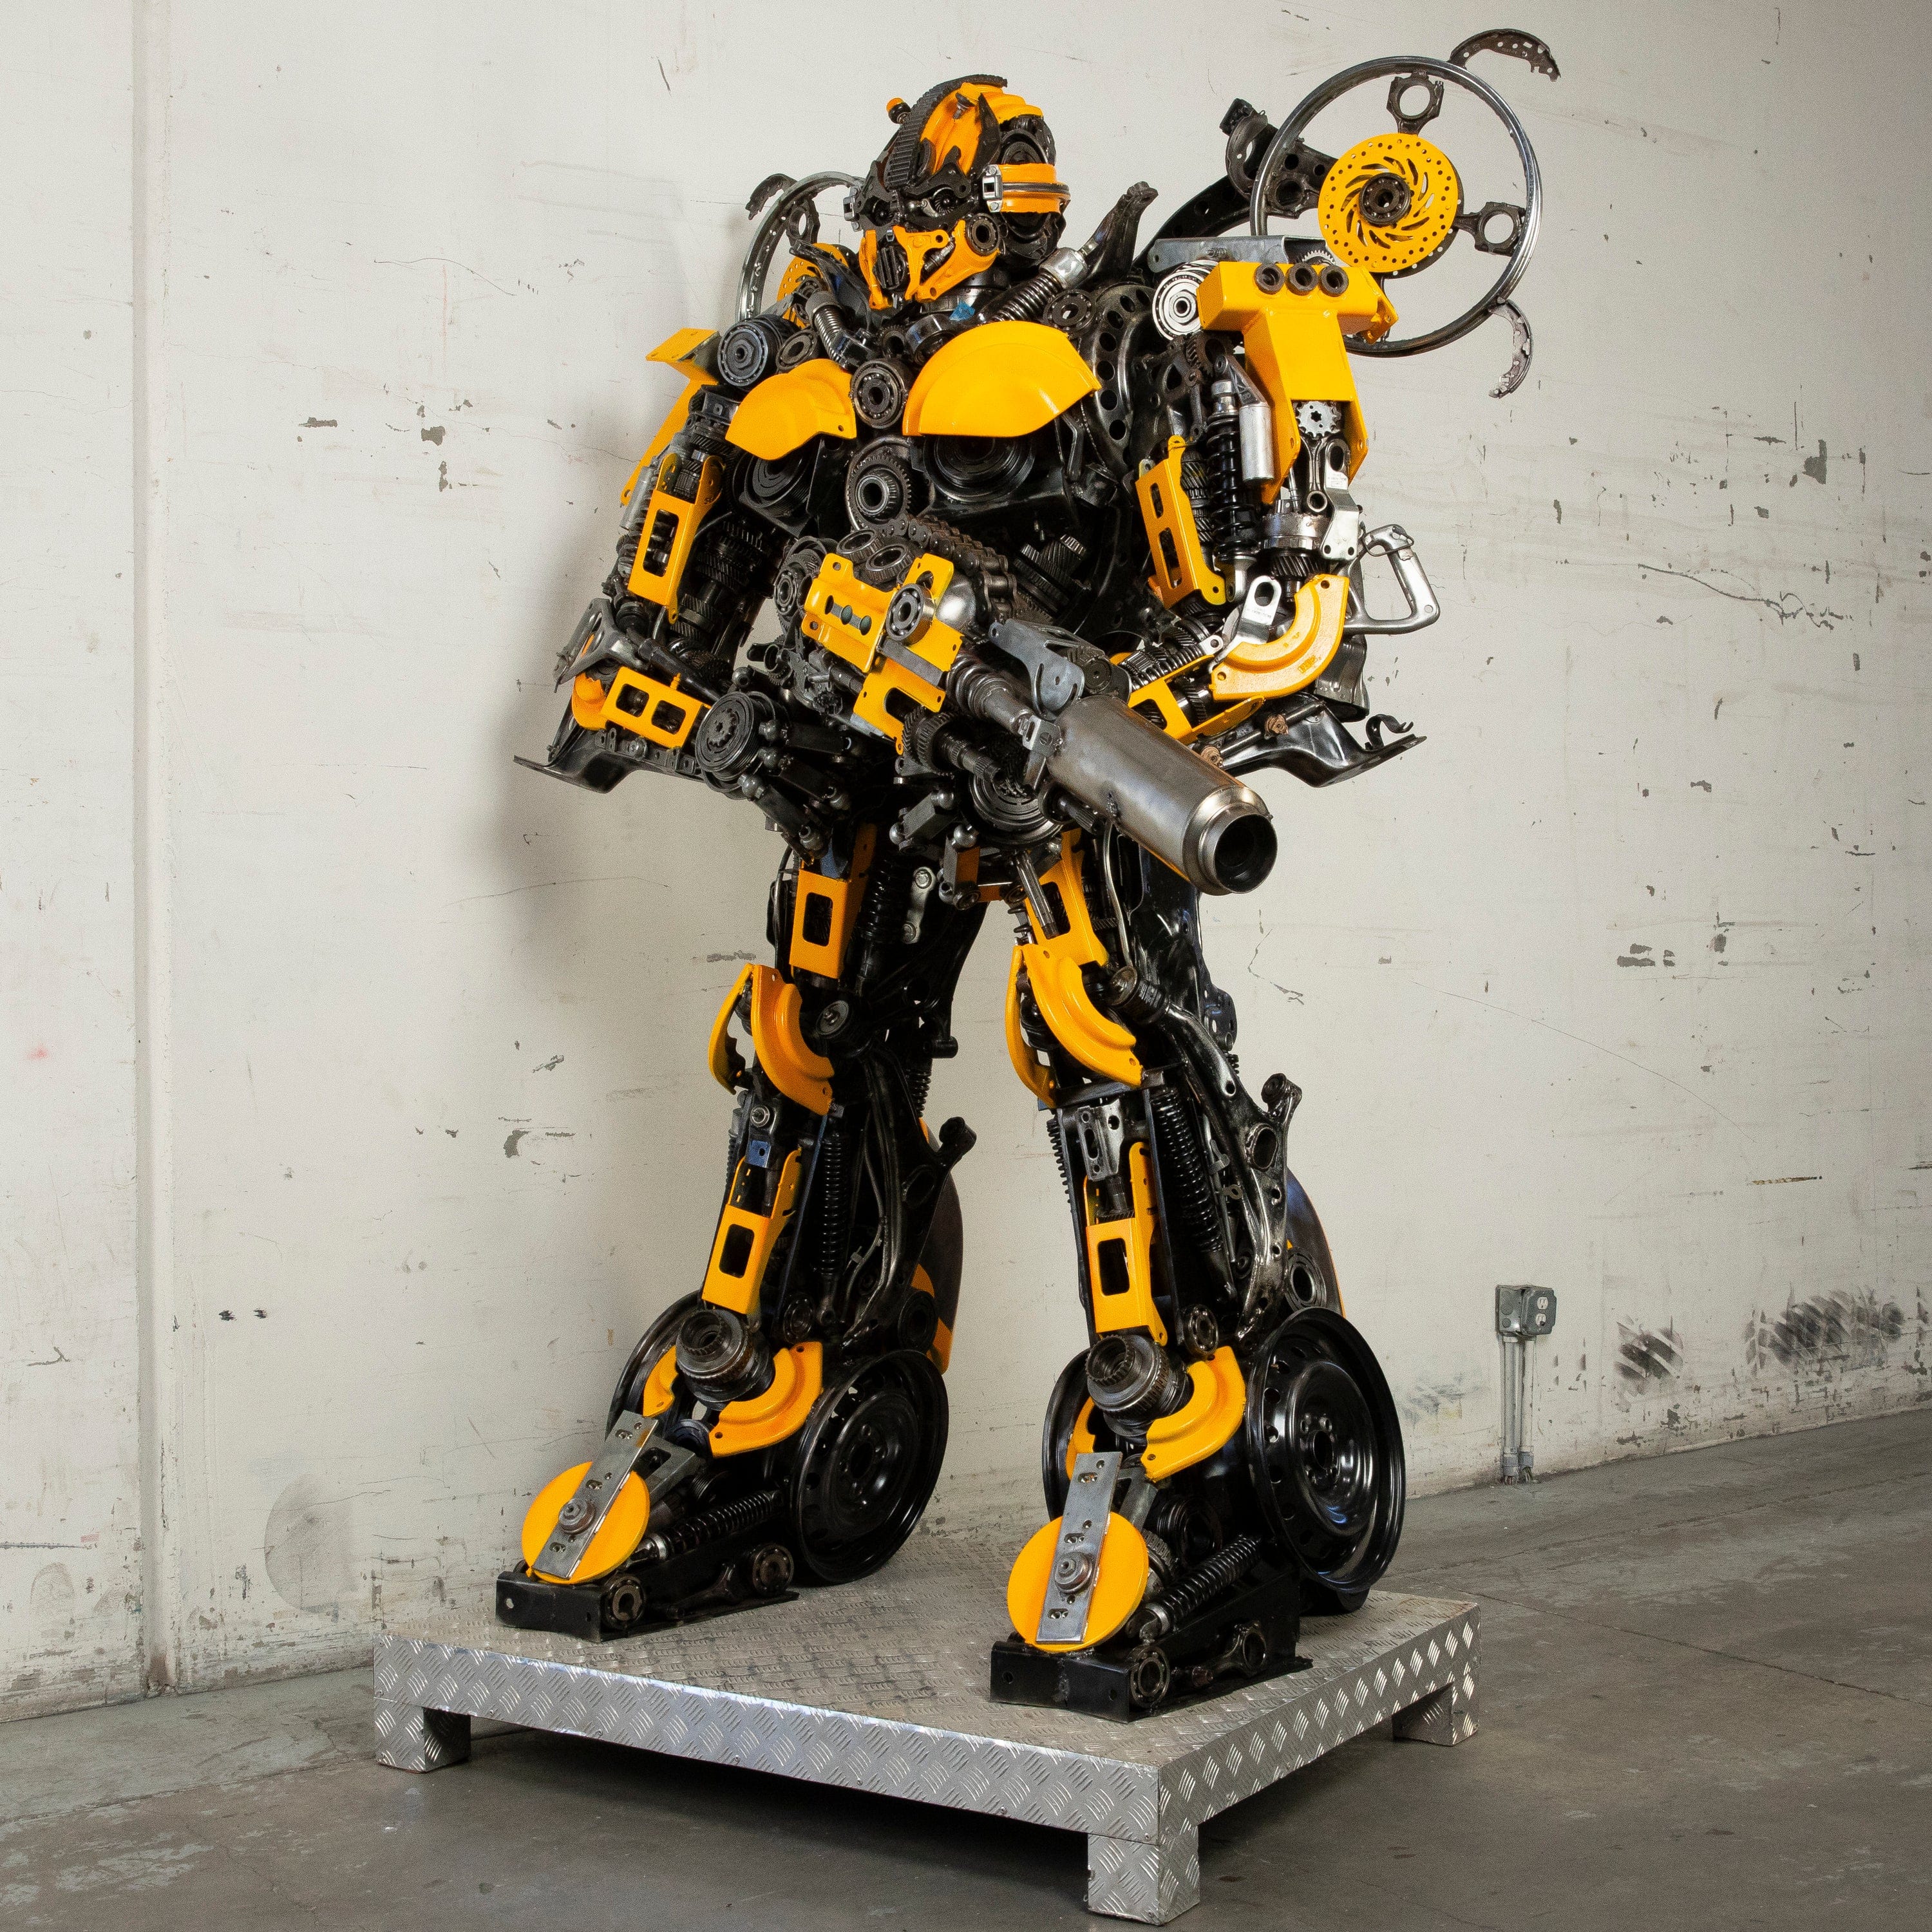 Kalifano Recycled Metal Art 91" Bumblebee Inspired Recycled Metal Art Sculpture RMS-BB230-S34